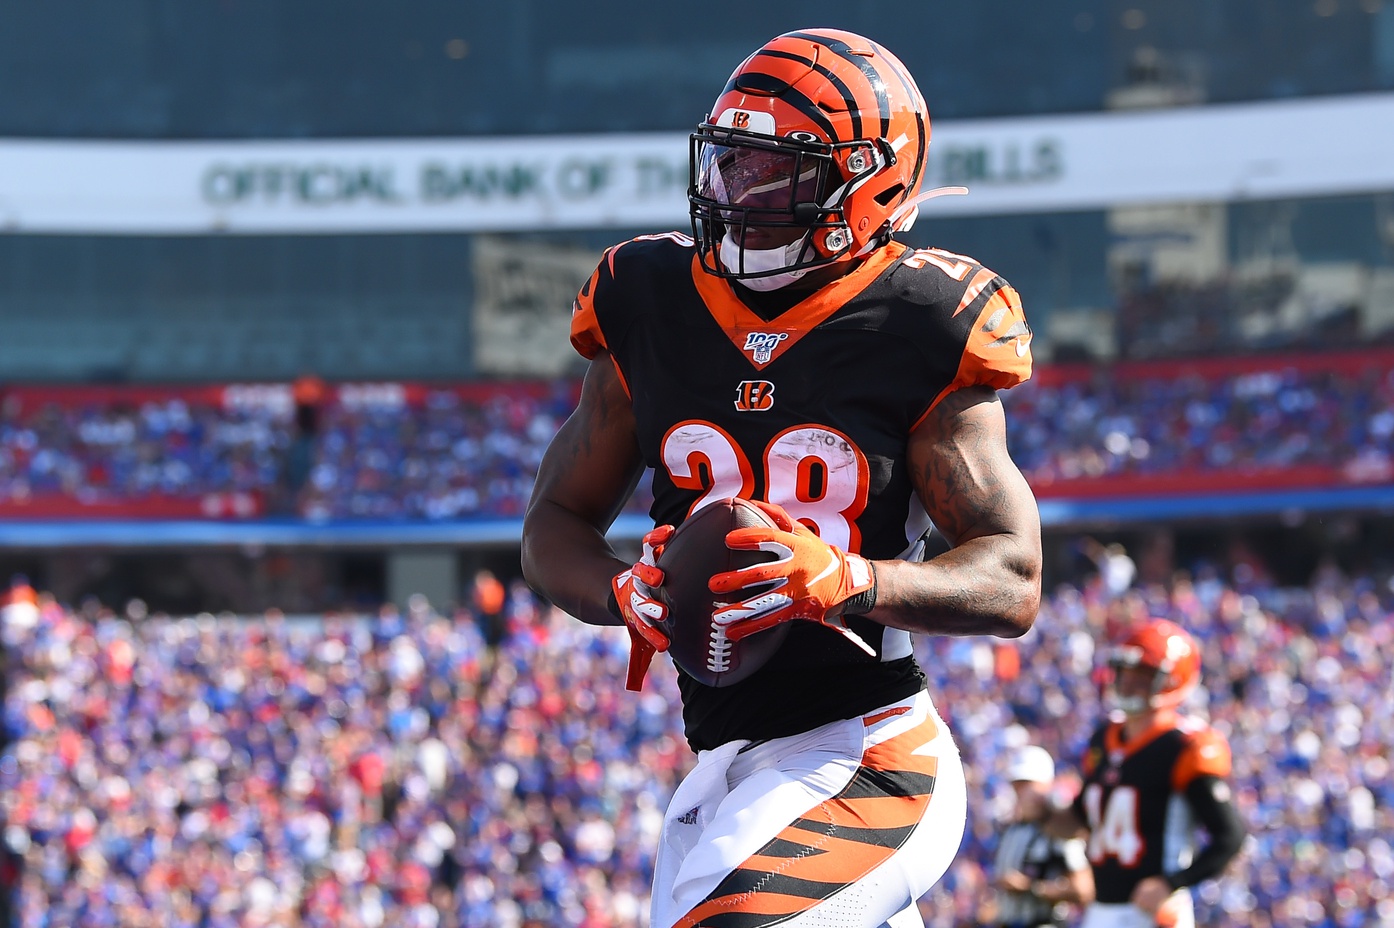 Madden 21 ratings revealed for the entire Bengals roster.